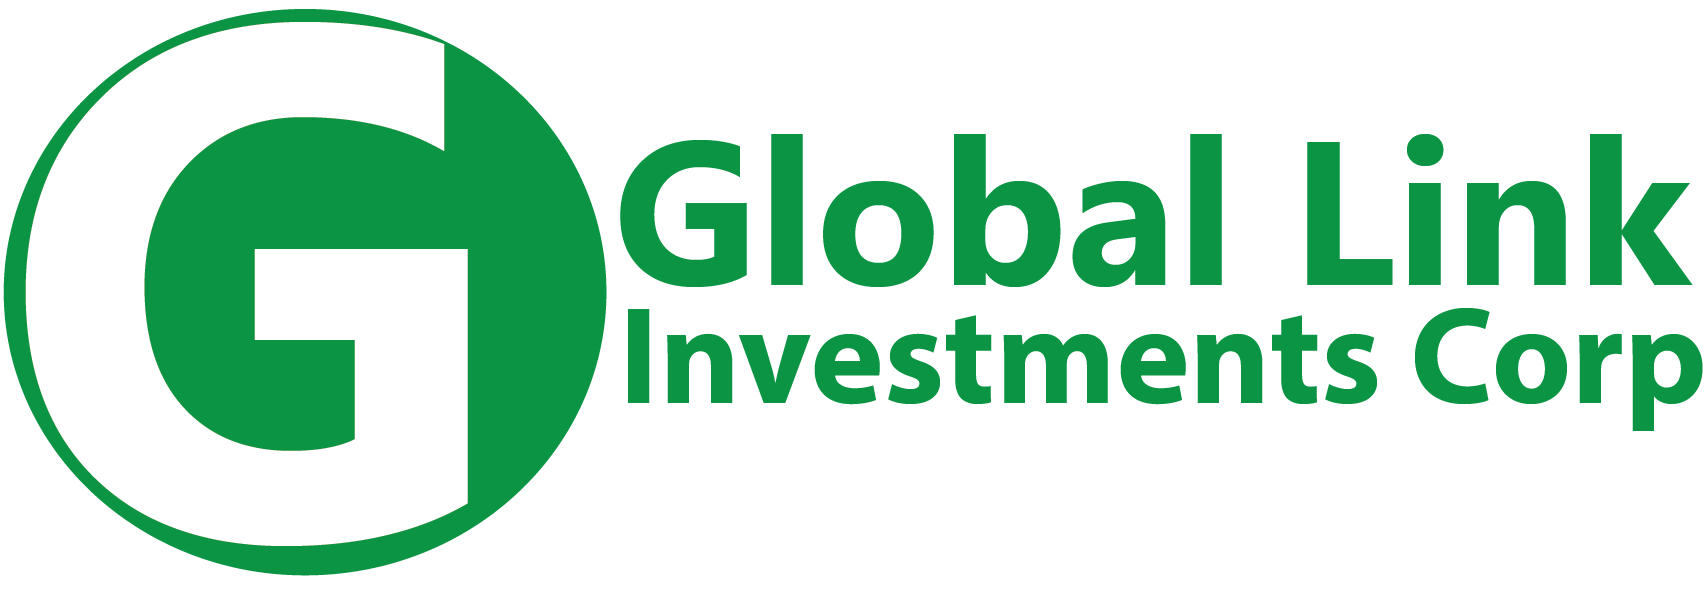 Global link & Investments Corp ( GLICO )